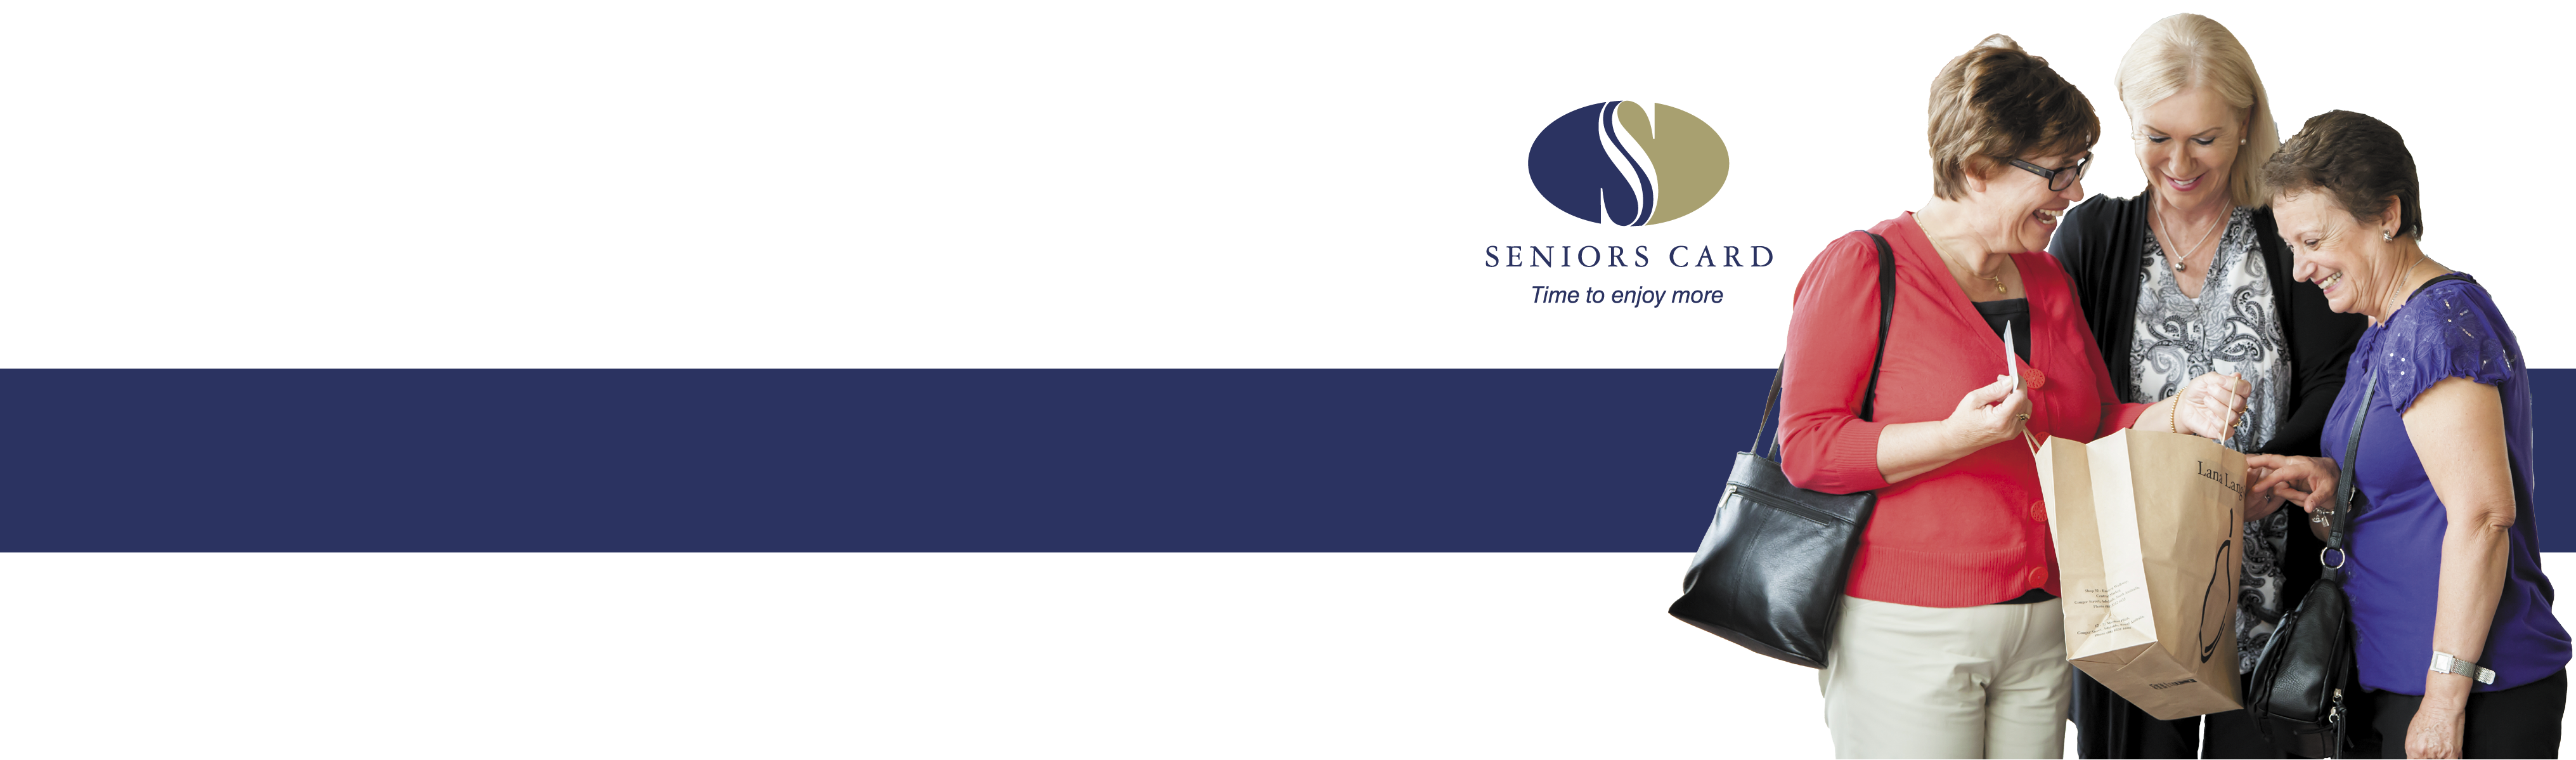 Save money with your Seniors Card!